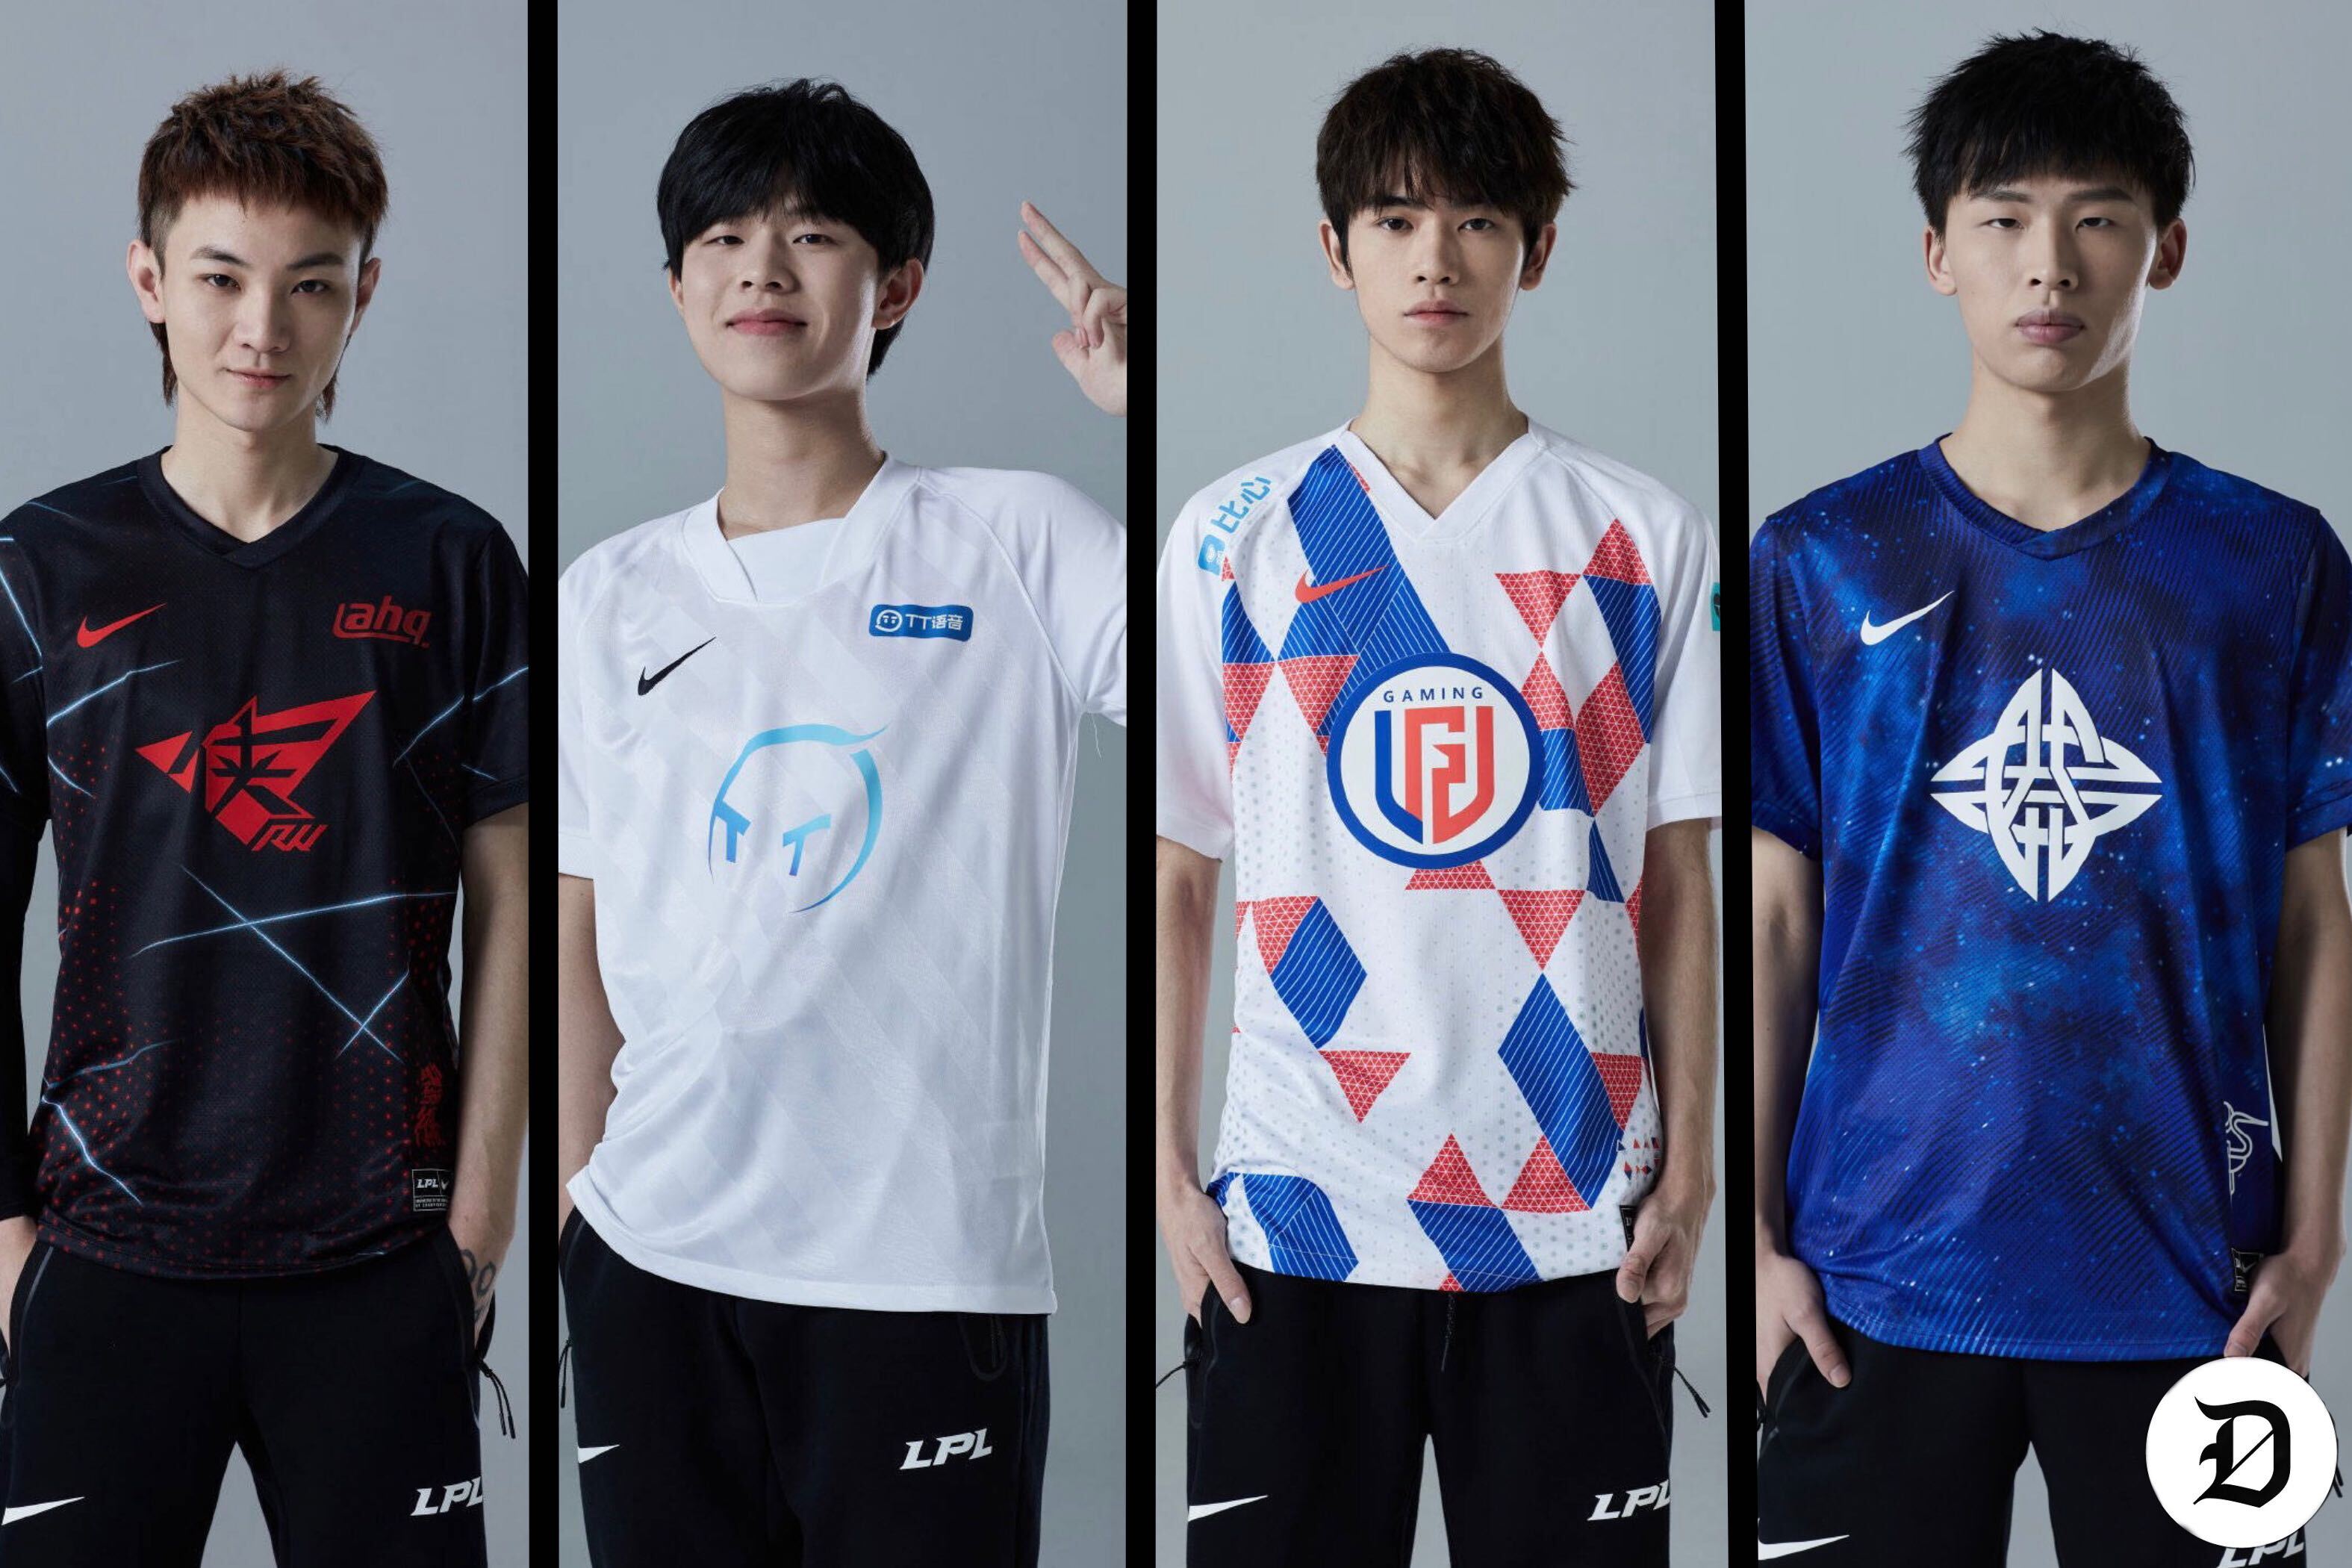 Dot Esports on Twitter: "The new #LPL Nike jerseys for 2021 season are here! Which your favorite? 🔥 Images via: https://t.co/Yq2X6QdO5B" / Twitter